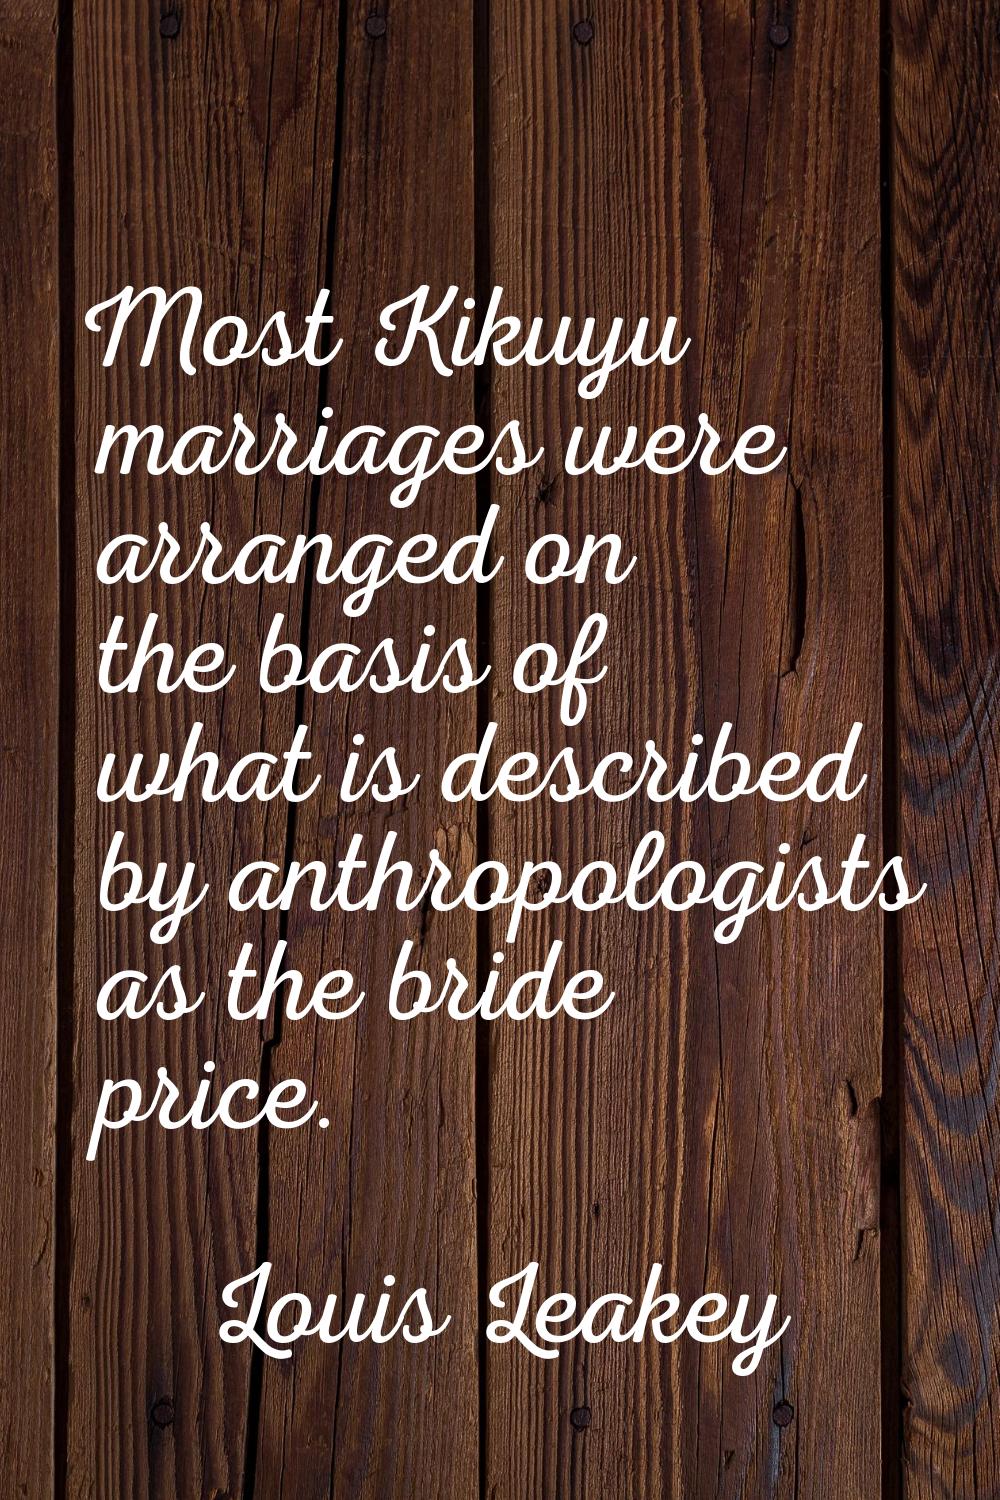 Most Kikuyu marriages were arranged on the basis of what is described by anthropologists as the bri